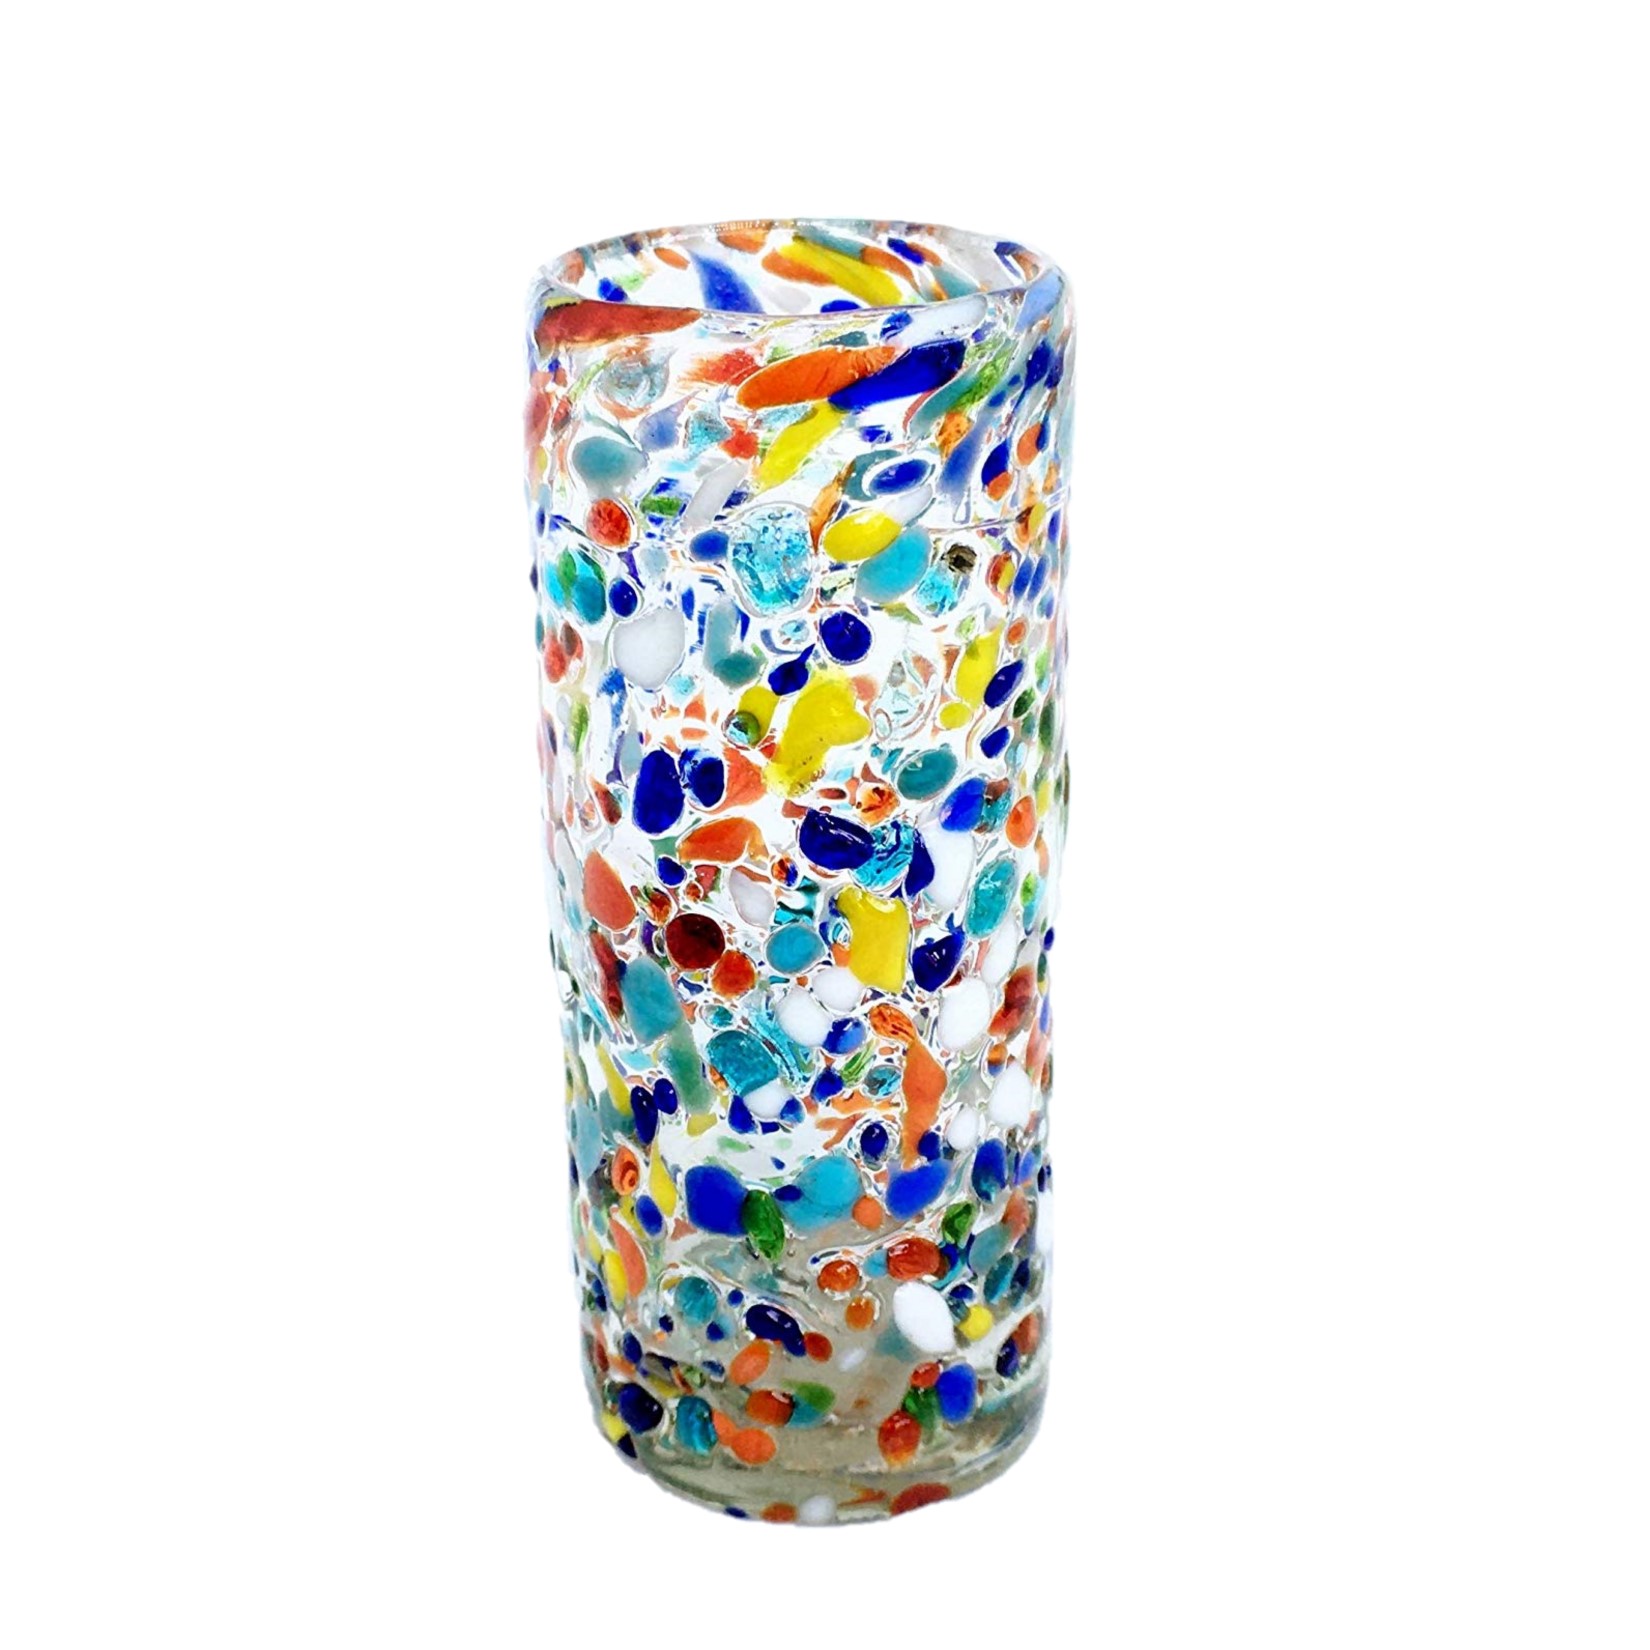 Wholesale Confetti Glassware / Confetti Rocks 2 oz Tequila Shot Glasses  / Sip your favorite Tequila or Mezcal with these iconic Confetti Rocks shot glasses, which are a must-have of any bar. Crafted one by one by skilled artisans in Tonala, Mexico, each glass is different from the next making them unique works of art. They feature our colorful Confetti rocks design with small colored-glass rounded cristals embedded in clear glass that give them a nice feeling and grip. These shot glasses are festive and fun, making them a perfect gift for anyone. Get ready for your next fiesta!!